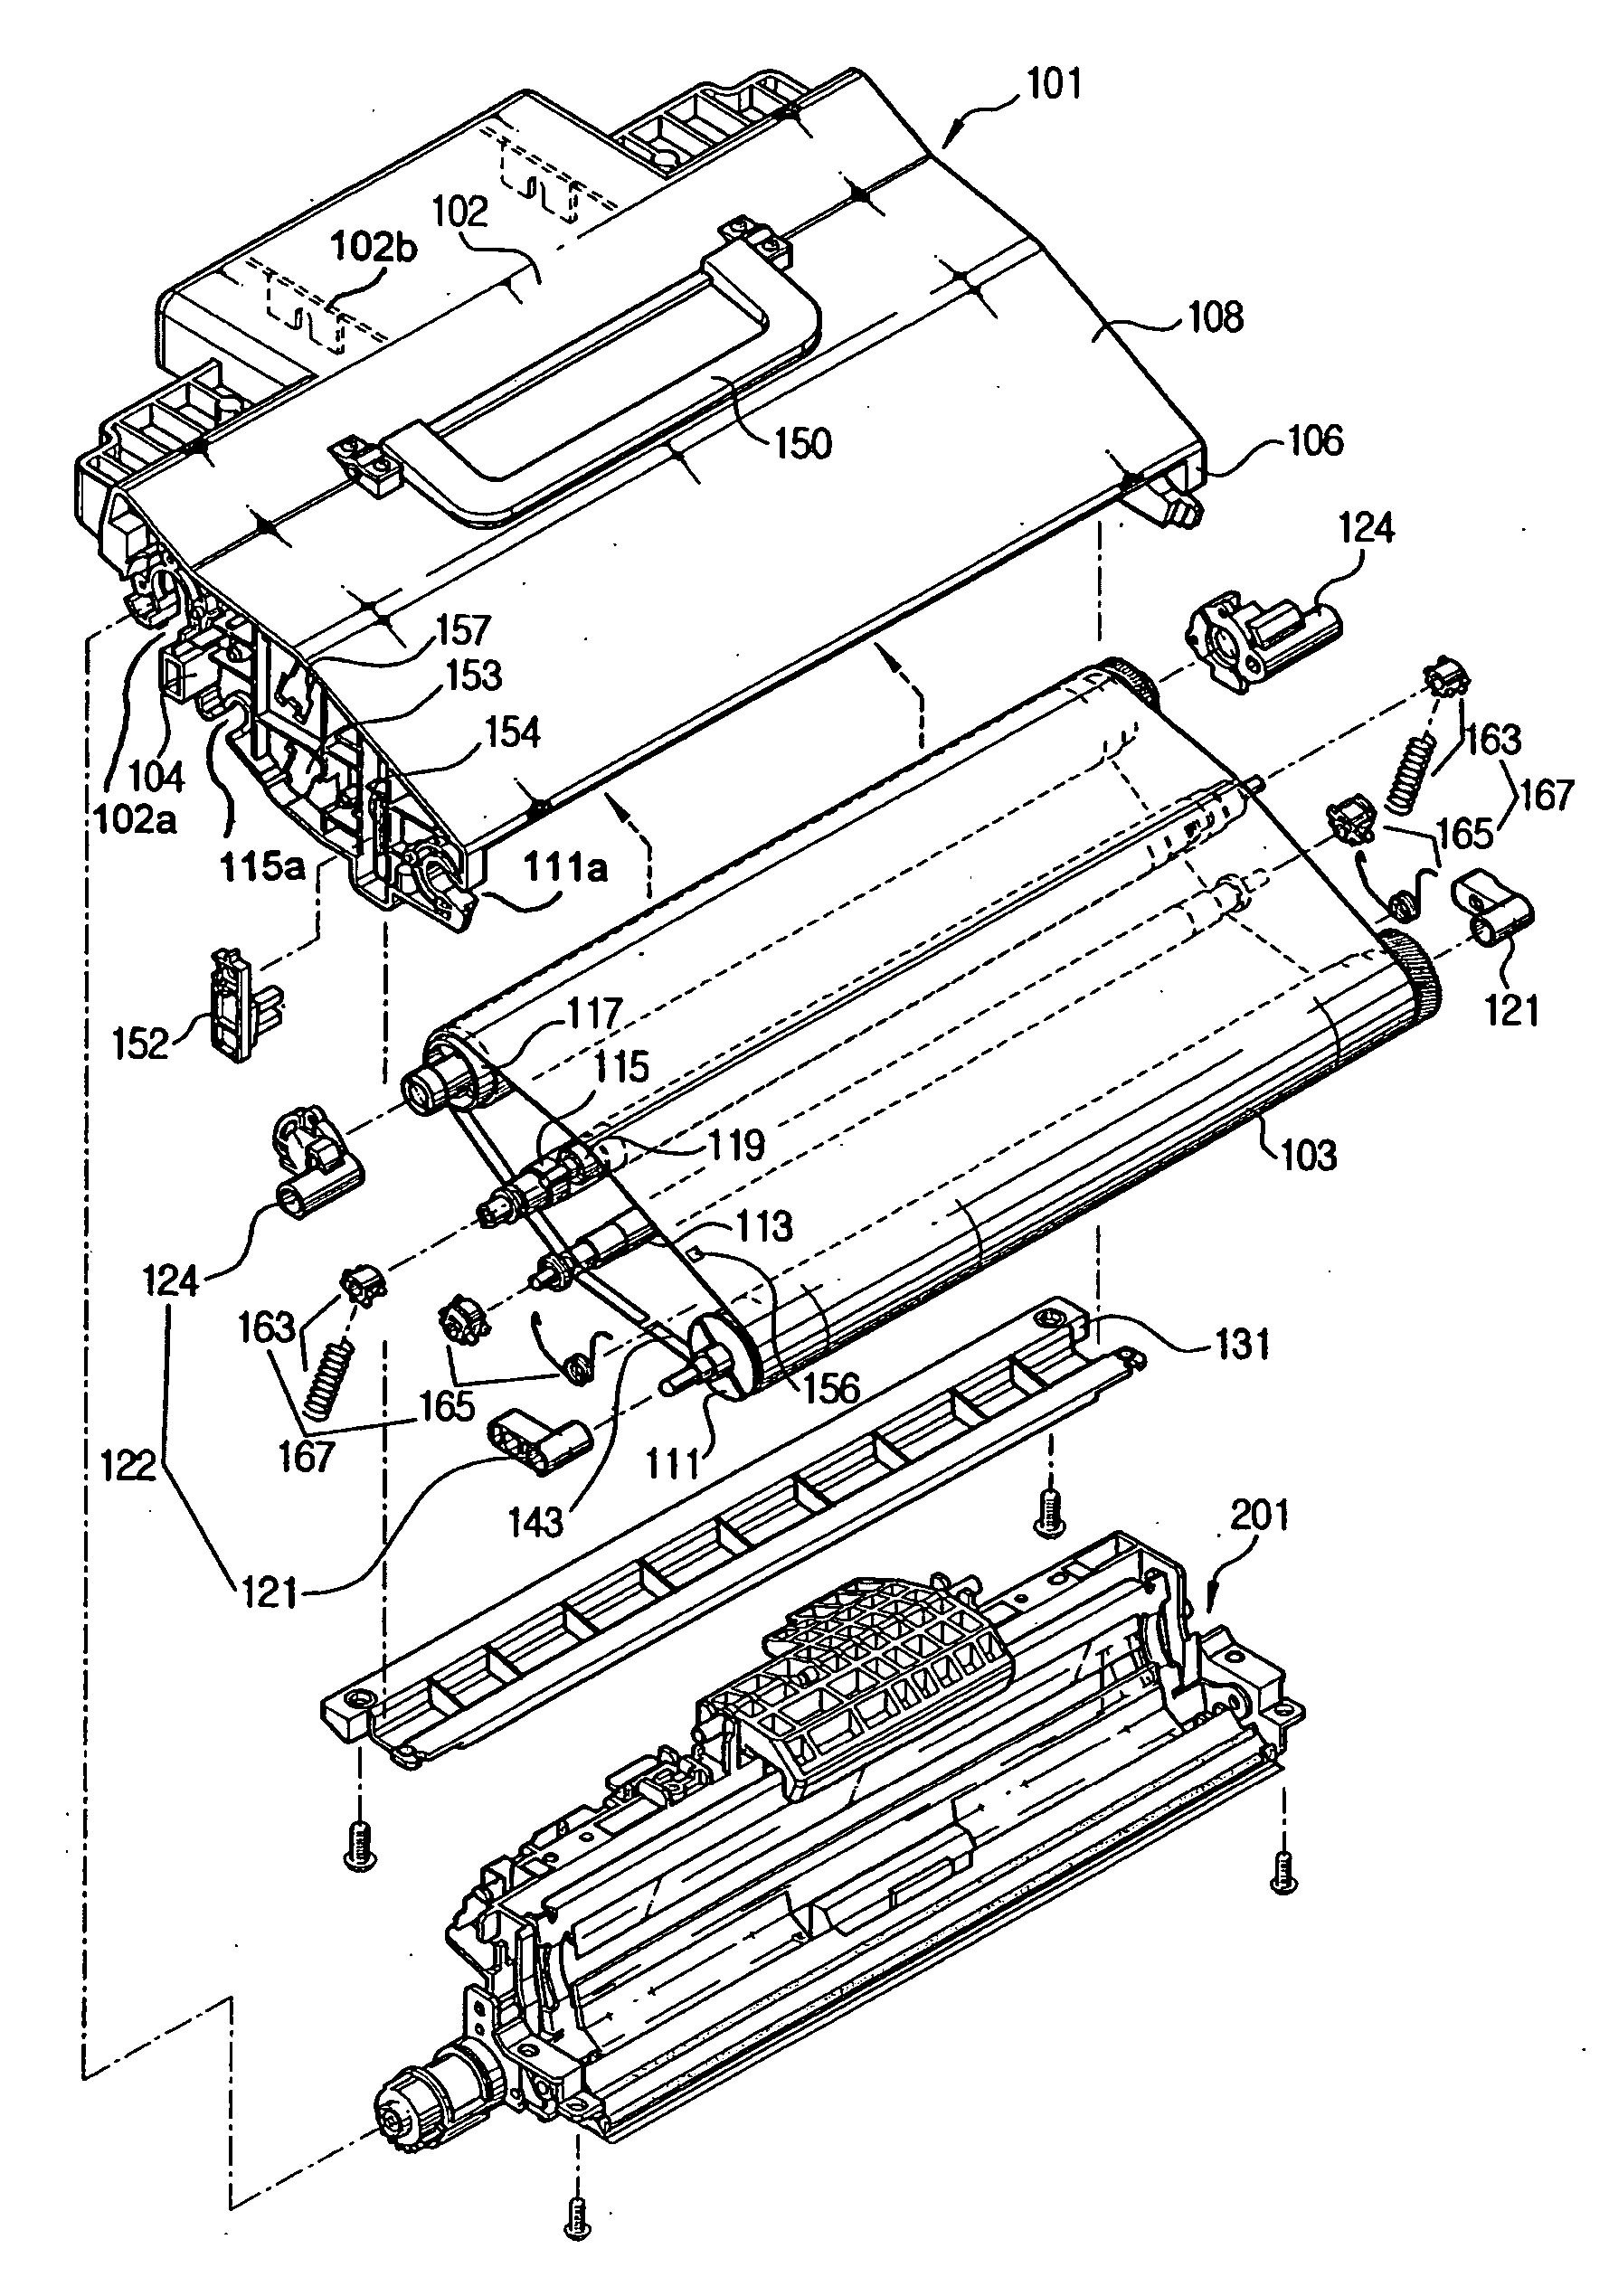 Transfer unit used with image forming apparatus